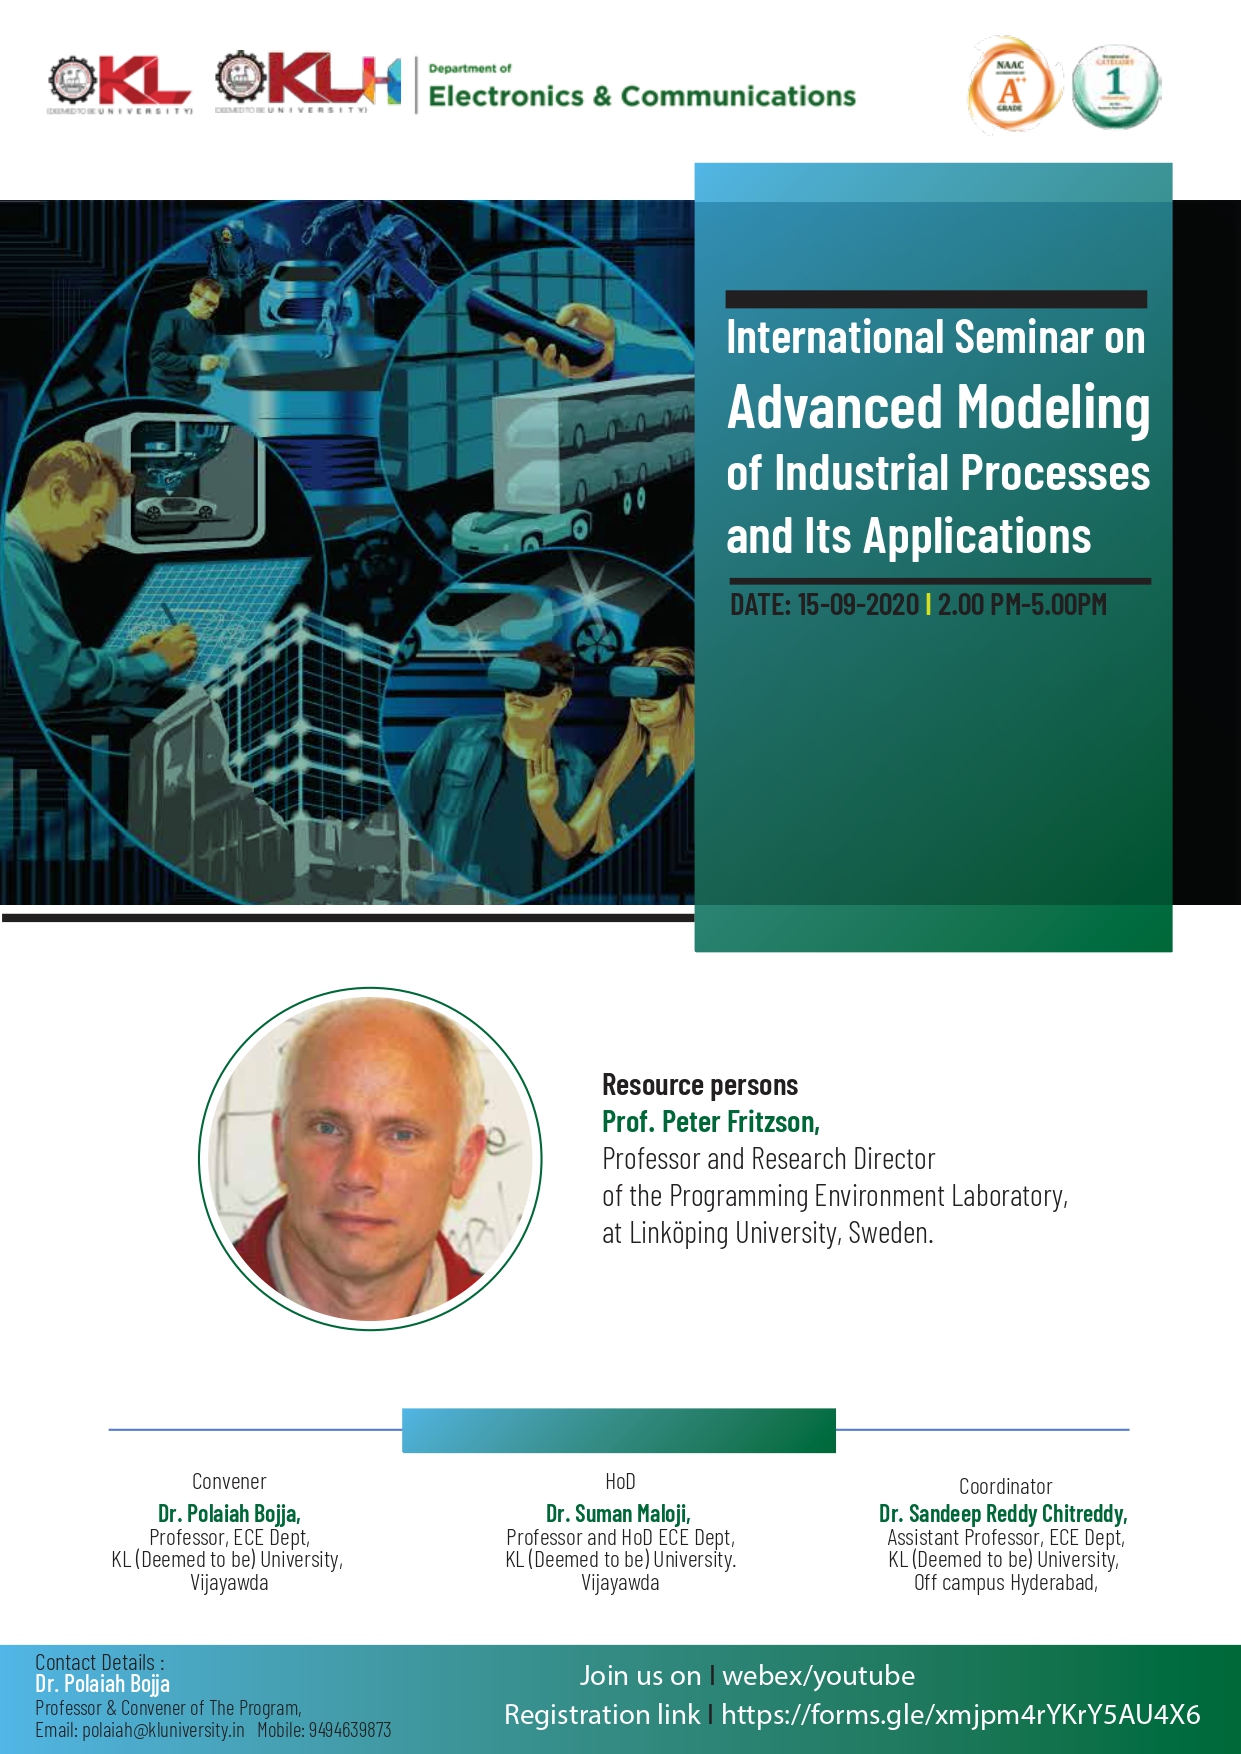 International Seminar on Advanced Modeling of Industrial Processes and its Applications on 15th September 2020 ,by Prof. Peter Fritzson, Professor and Research Director of the Programming Environment Laboratory, at Linköping University, Sweden.